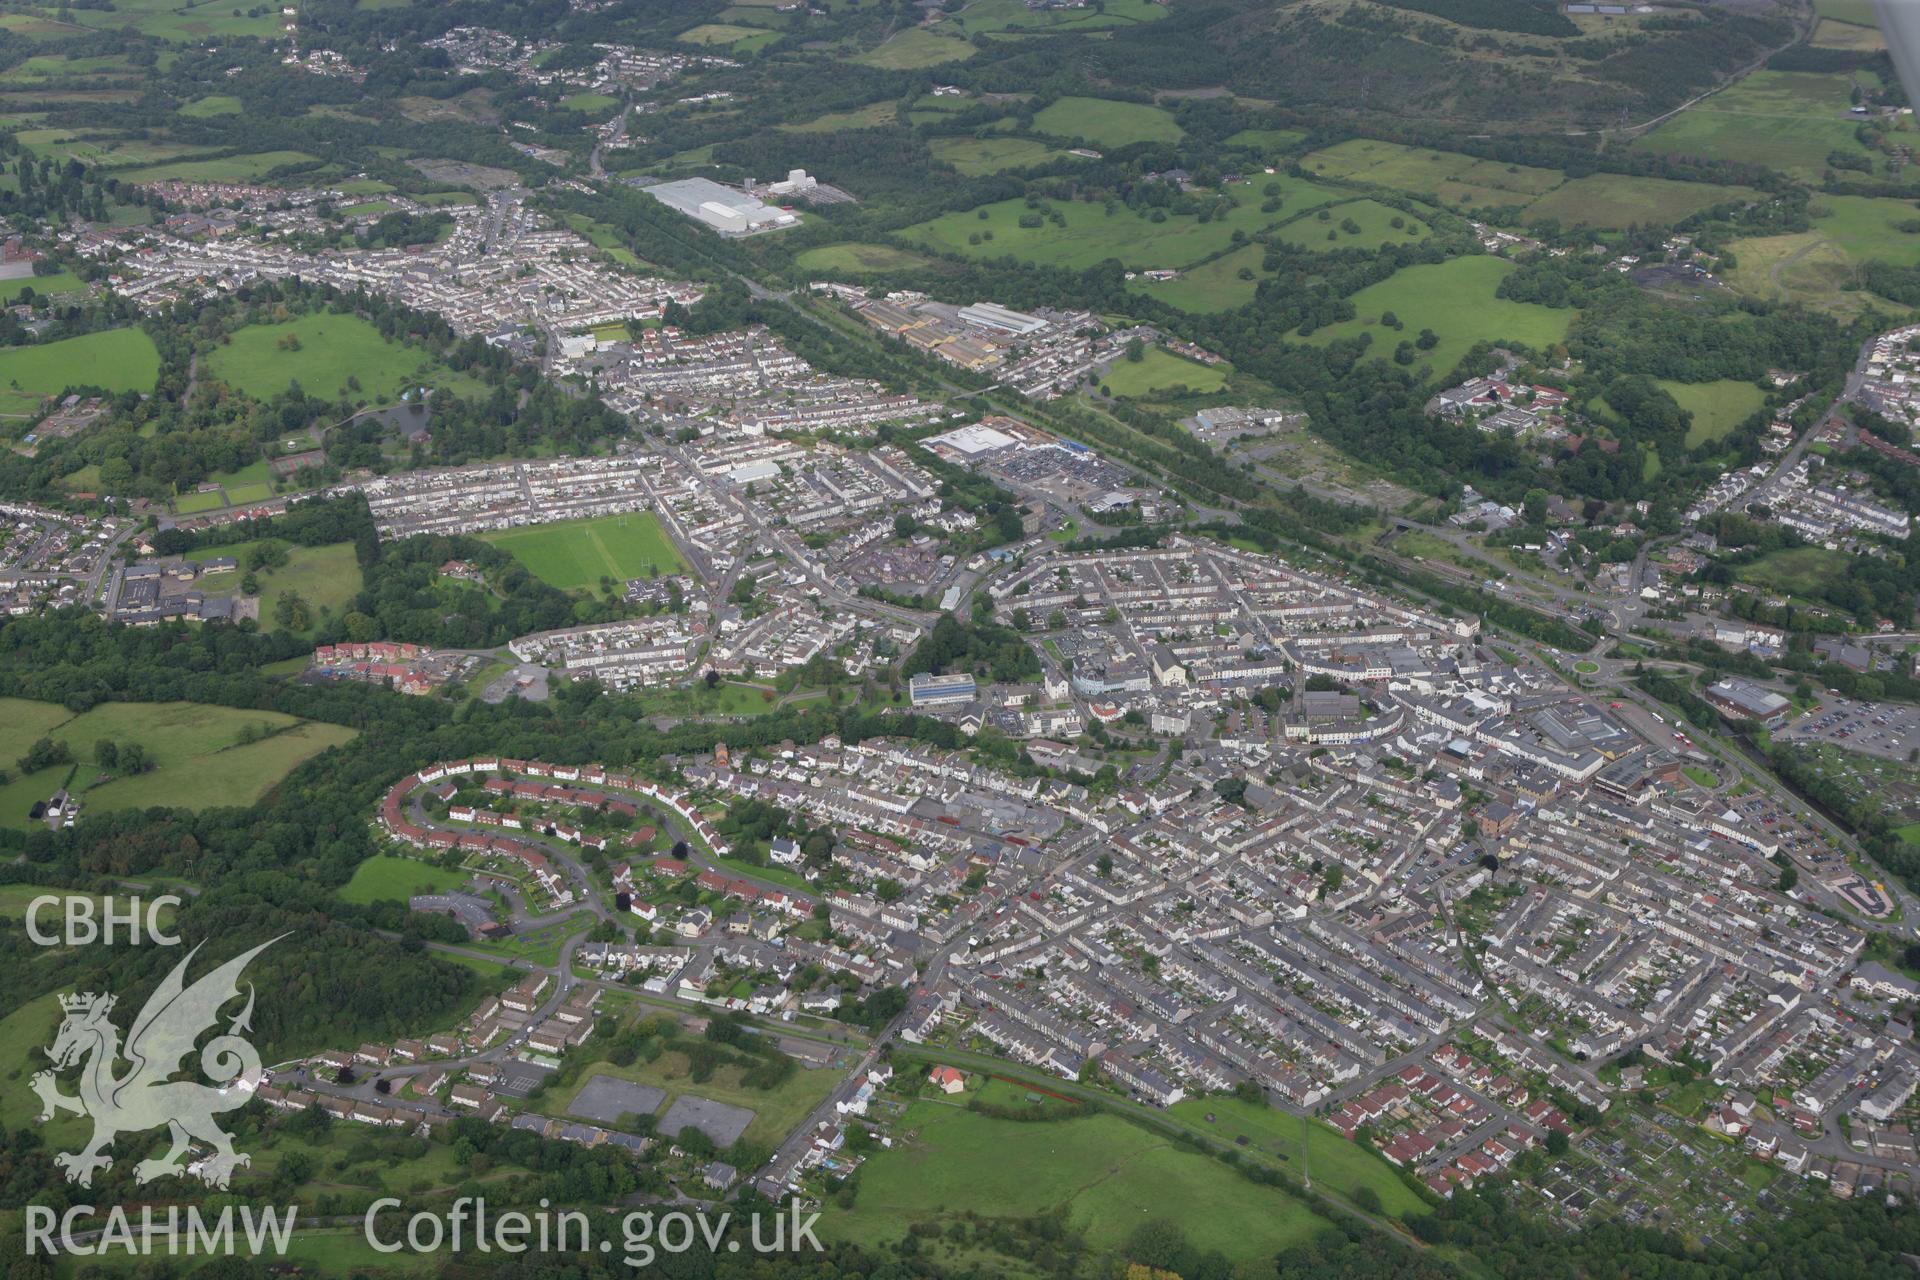 RCAHMW colour oblique photograph of Aberdare townscape, from the south. Taken by Toby Driver on 12/09/2008.